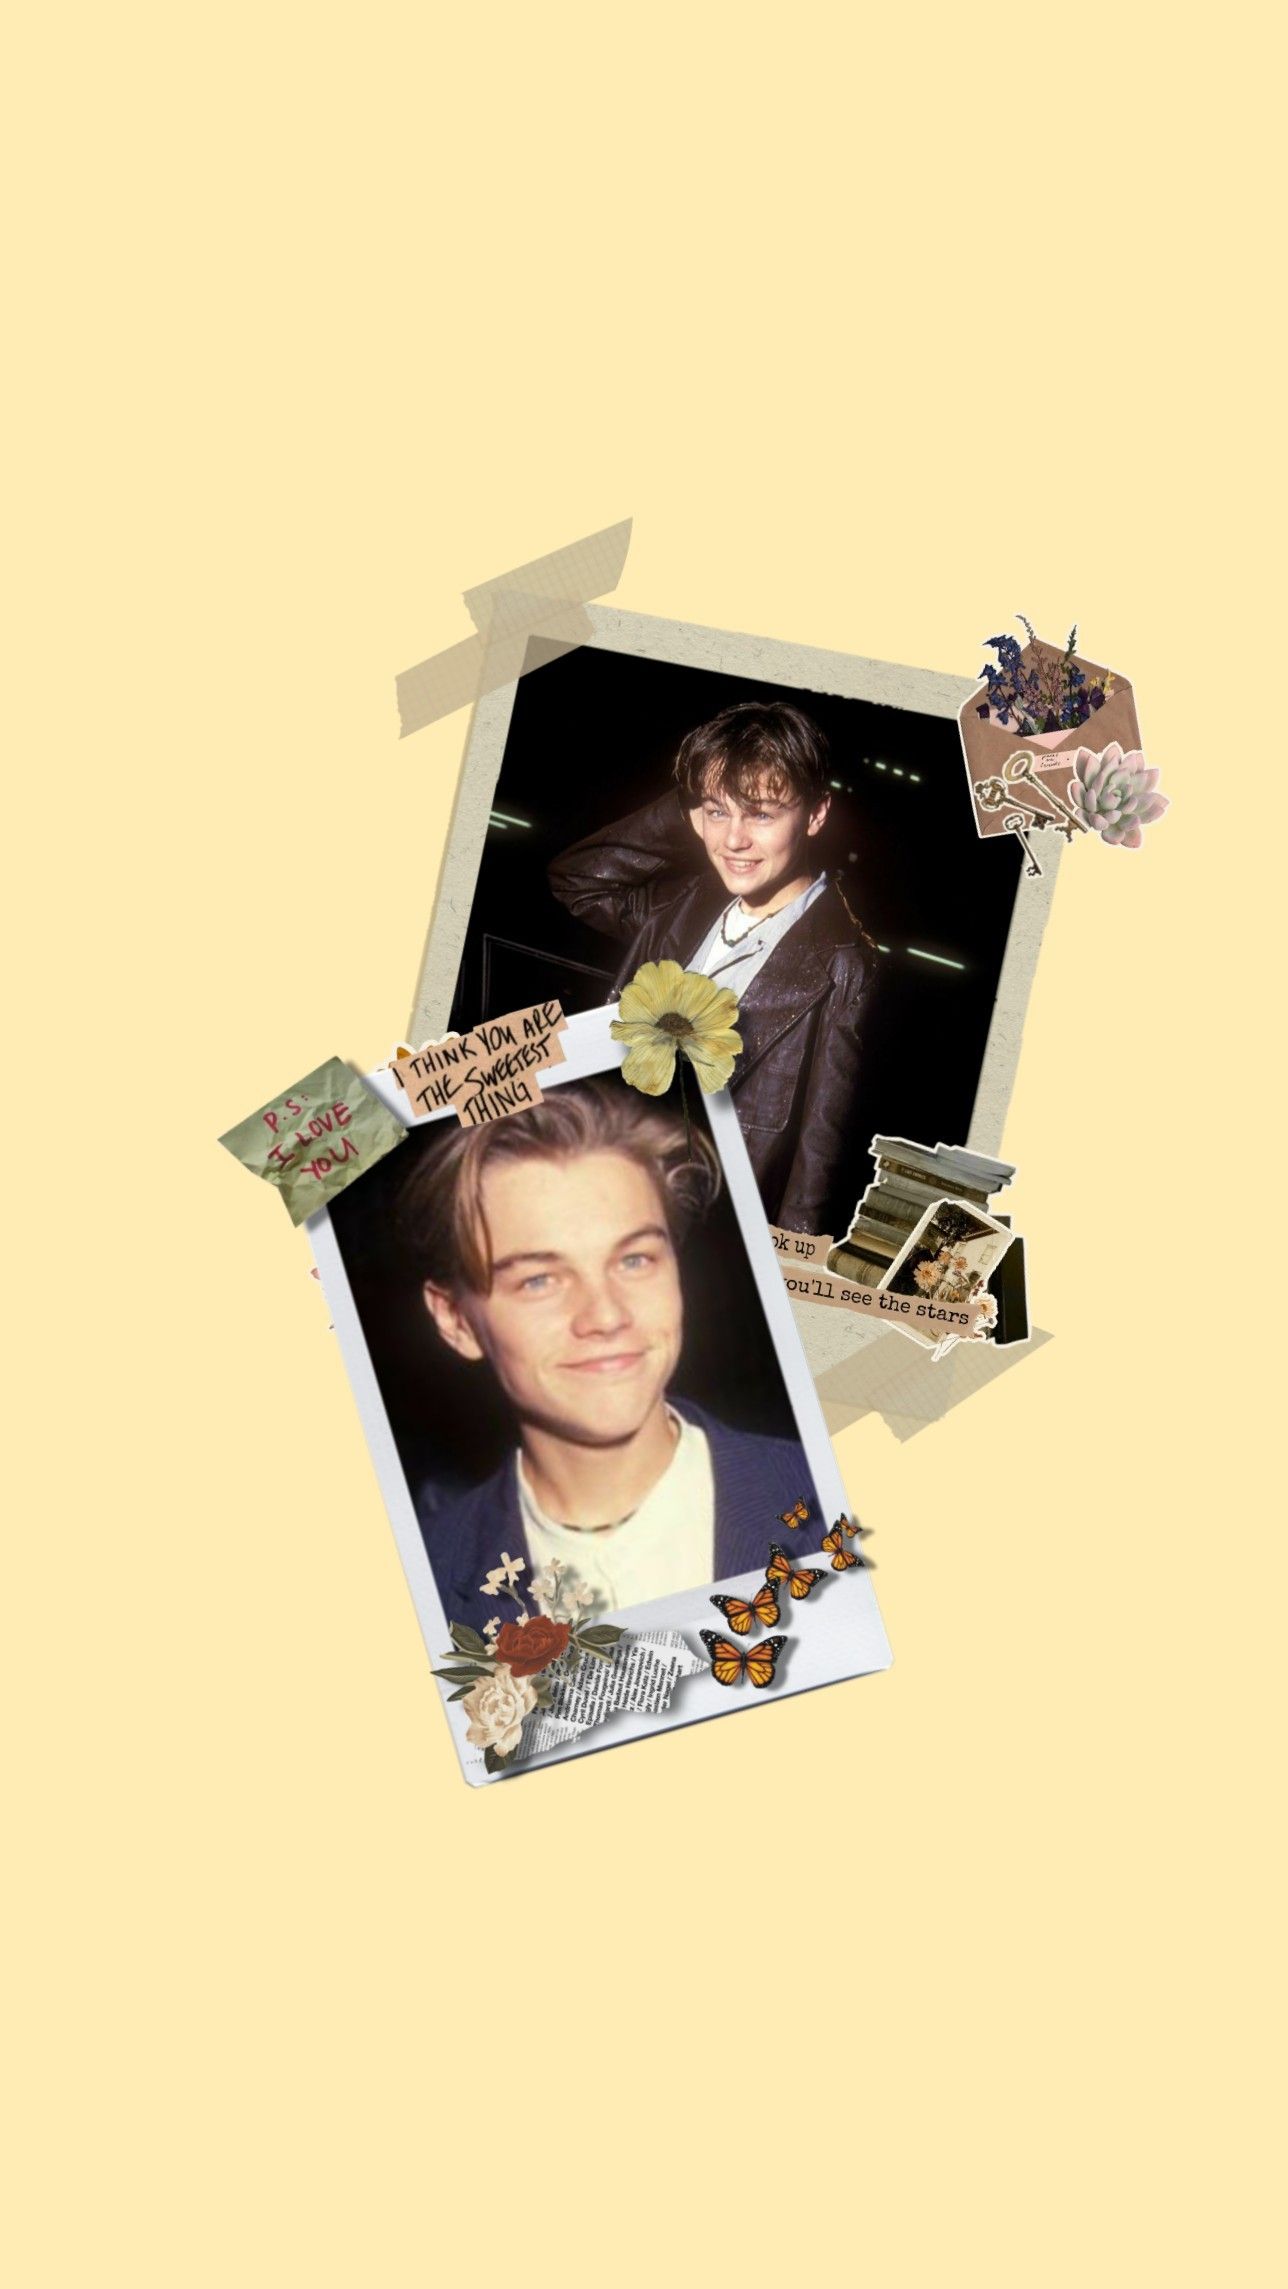 A collage of pictures with the same person - Leonardo DiCaprio